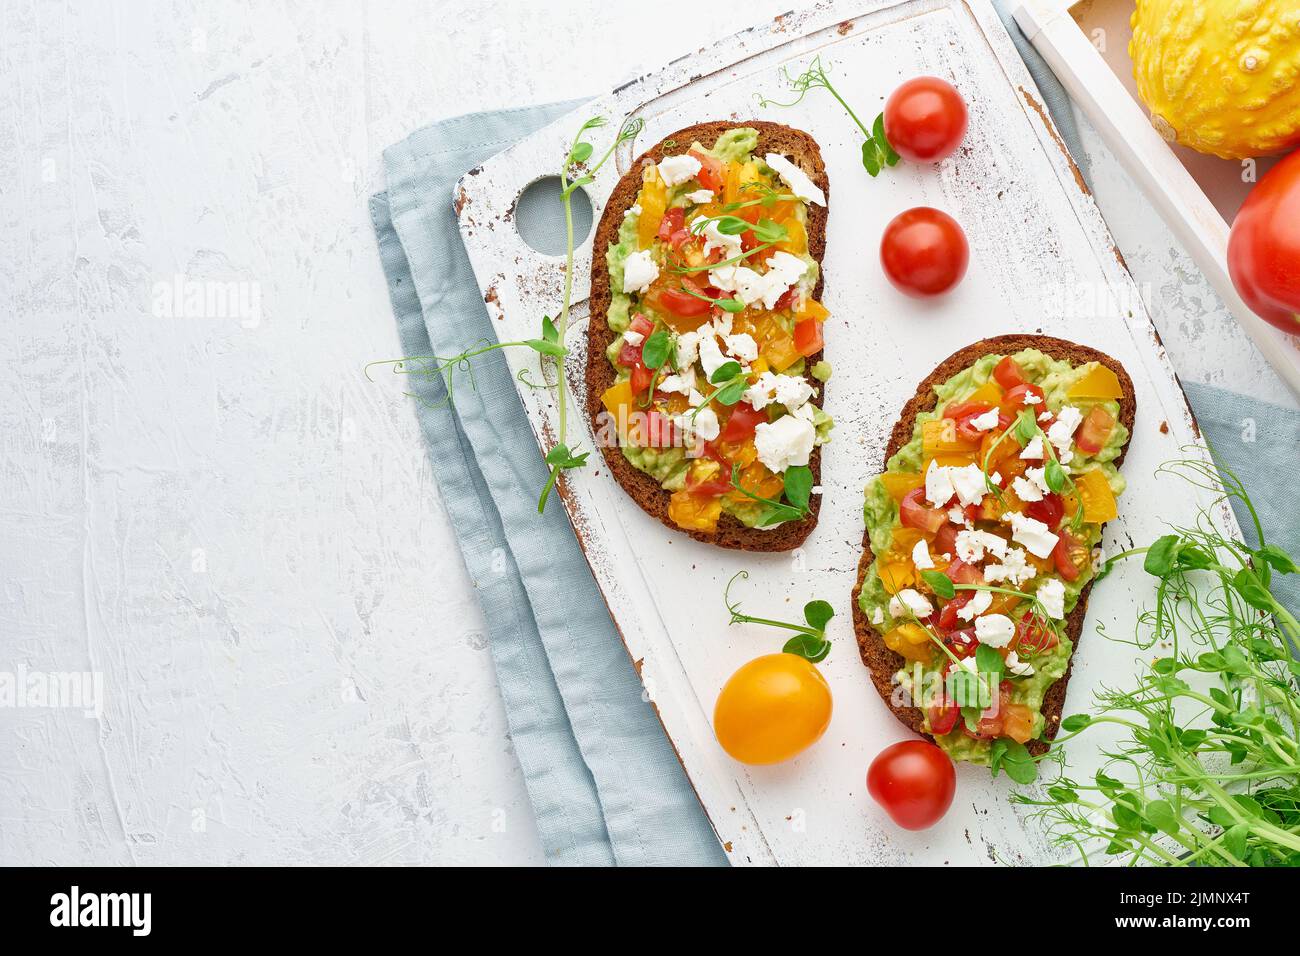 Avocado toast with feta and tomatoes, smorrebrod with ricotta, top view with copy space Stock Photo